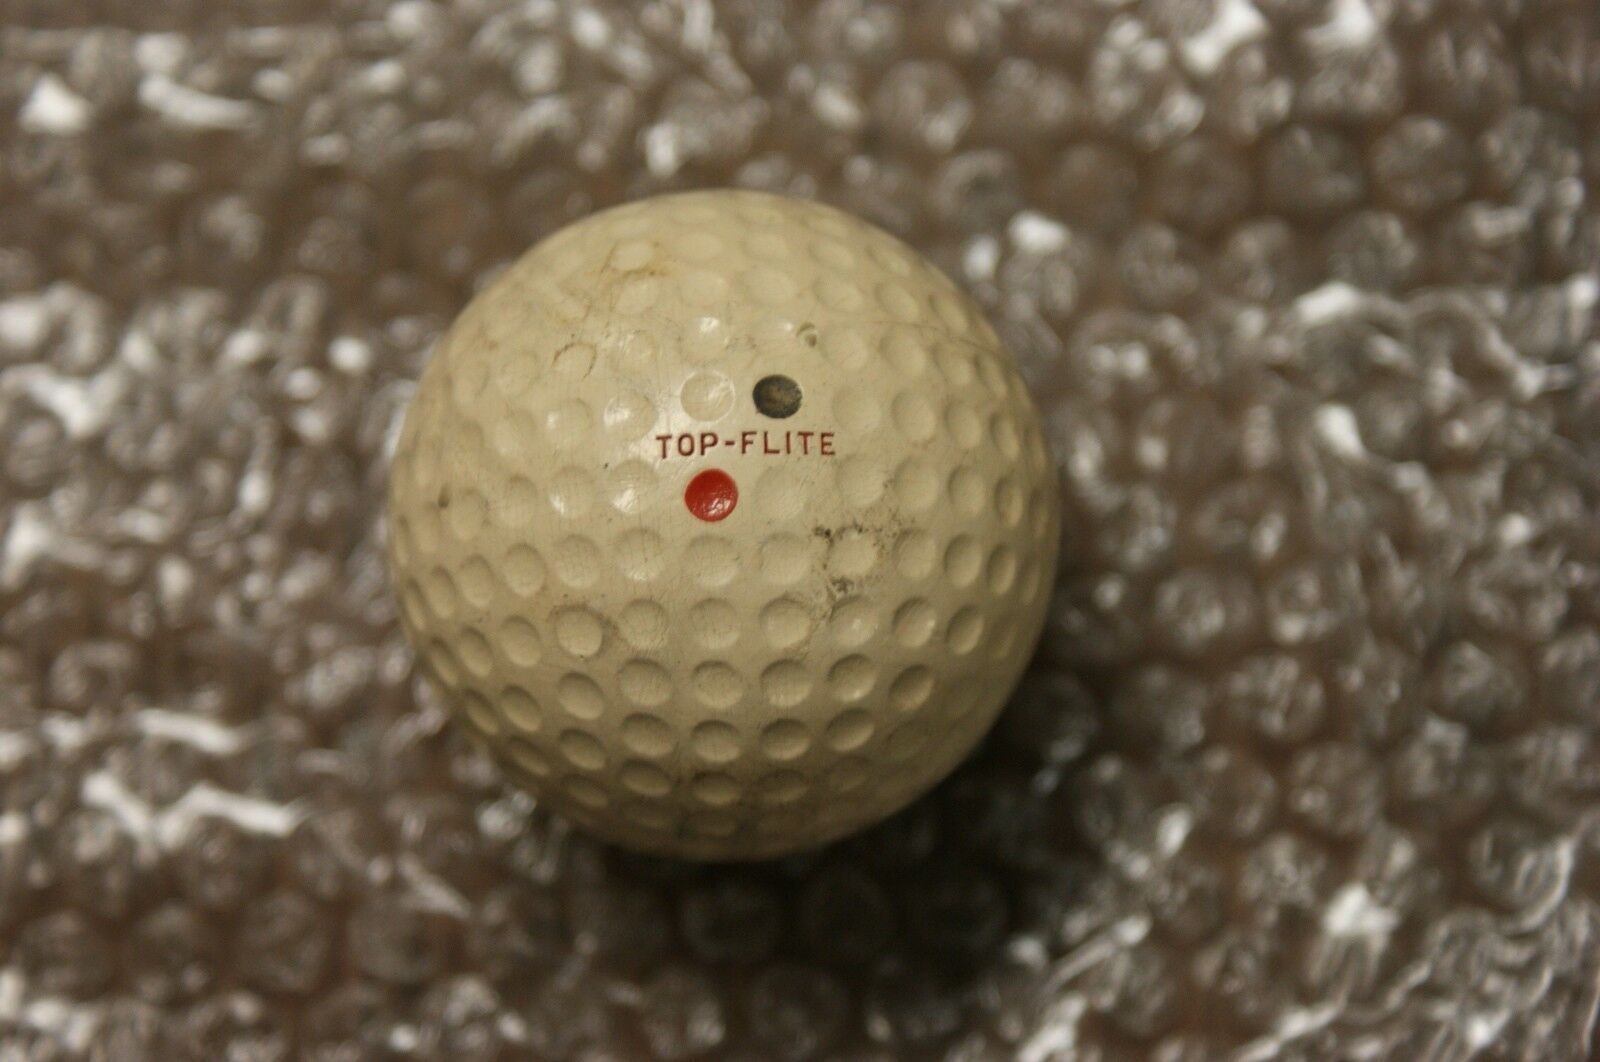 Spaulding Red and Gray Dot Top-flite golf ball cadwell gear cover